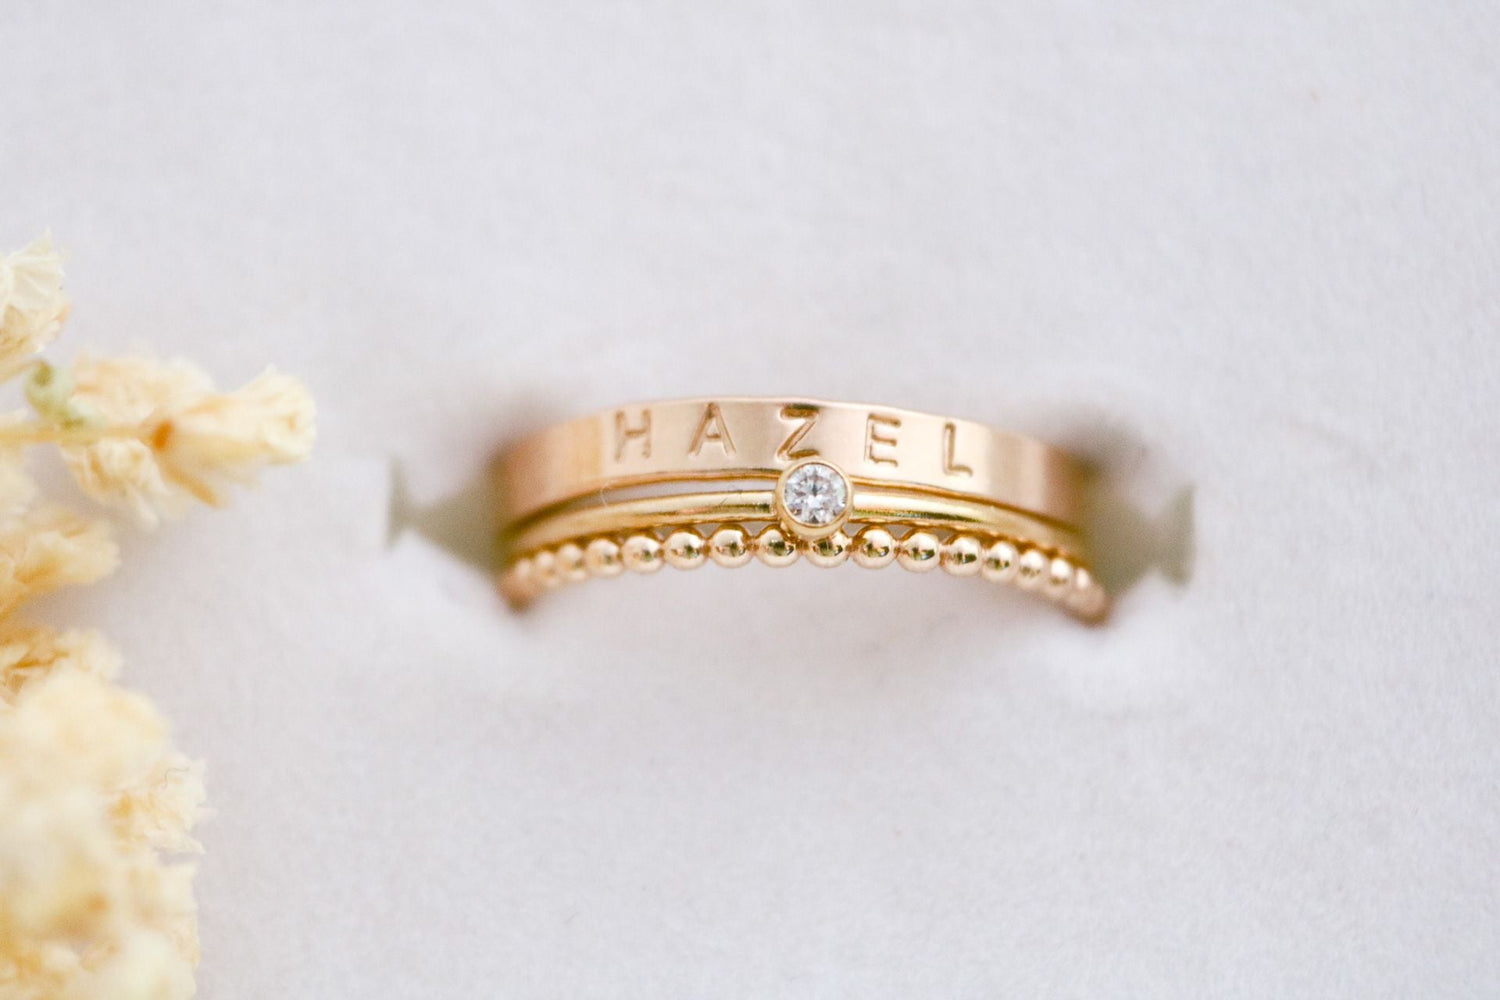 Letters Ring, Initials Ring, Gold Name Ring, Minimalist Couples Ring | eBay